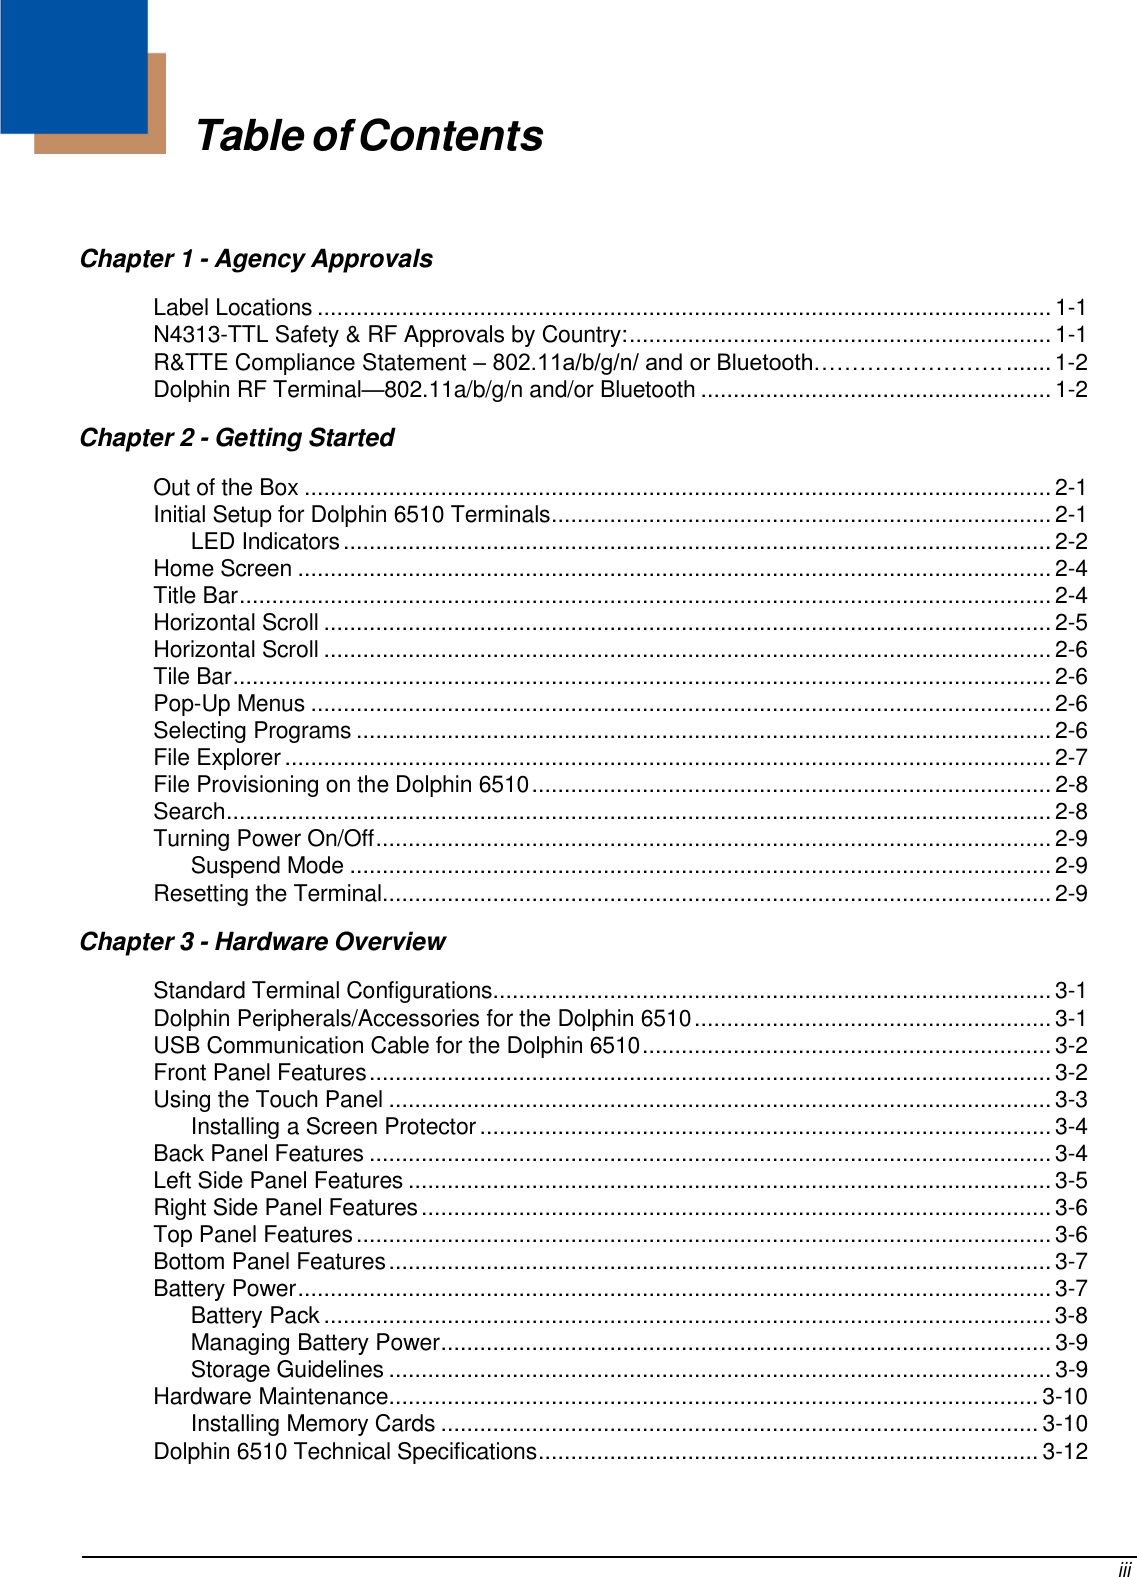     Table of Contents    Chapter 1 - Agency Approvals Label Locations ................................................................................................................. 1-1 N4313-TTL Safety &amp; RF Approvals by Country: ................................................................. 1-1 R&amp;TTE Compliance Statement – 802.11a/b/g/n/ and or Bluetooth……………………. ....... 1-2 Dolphin RF Terminal—802.11a/b/g/n and/or Bluetooth ...................................................... 1-2 Chapter 2 - Getting Started Out of the Box ................................................................................................................... 2-1 Initial Setup for Dolphin 6510 Terminals ............................................................................. 2-1 LED Indicators ............................................................................................................. 2-2 Home Screen .................................................................................................................... 2-4 Title Bar ............................................................................................................................. 2-4 Horizontal Scroll ................................................................................................................ 2-5 Horizontal Scroll ................................................................................................................ 2-6 Tile Bar .............................................................................................................................. 2-6 Pop-Up Menus .................................................................................................................. 2-6 Selecting Programs ........................................................................................................... 2-6 File Explorer ...................................................................................................................... 2-7 File Provisioning on the Dolphin 6510 ................................................................................ 2-8 Search ............................................................................................................................... 2-8 Turning Power On/Off ........................................................................................................ 2-9 Suspend Mode ............................................................................................................ 2-9 Resetting the Terminal ....................................................................................................... 2-9 Chapter 3 - Hardware Overview Standard Terminal Configurations...................................................................................... 3-1 Dolphin Peripherals/Accessories for the Dolphin 6510 ....................................................... 3-1 USB Communication Cable for the Dolphin 6510 ............................................................... 3-2 Front Panel Features ......................................................................................................... 3-2 Using the Touch Panel ...................................................................................................... 3-3 Installing a Screen Protector ........................................................................................ 3-4 Back Panel Features ......................................................................................................... 3-4 Left Side Panel Features ................................................................................................... 3-5 Right Side Panel Features ................................................................................................. 3-6 Top Panel Features ........................................................................................................... 3-6 Bottom Panel Features ...................................................................................................... 3-7 Battery Power .................................................................................................................... 3-7 Battery Pack ................................................................................................................ 3-8 Managing Battery Power .............................................................................................. 3-9 Storage Guidelines ...................................................................................................... 3-9 Hardware Maintenance .................................................................................................... 3-10 Installing Memory Cards ............................................................................................ 3-10 Dolphin 6510 Technical Specifications ............................................................................. 3-12      iii 